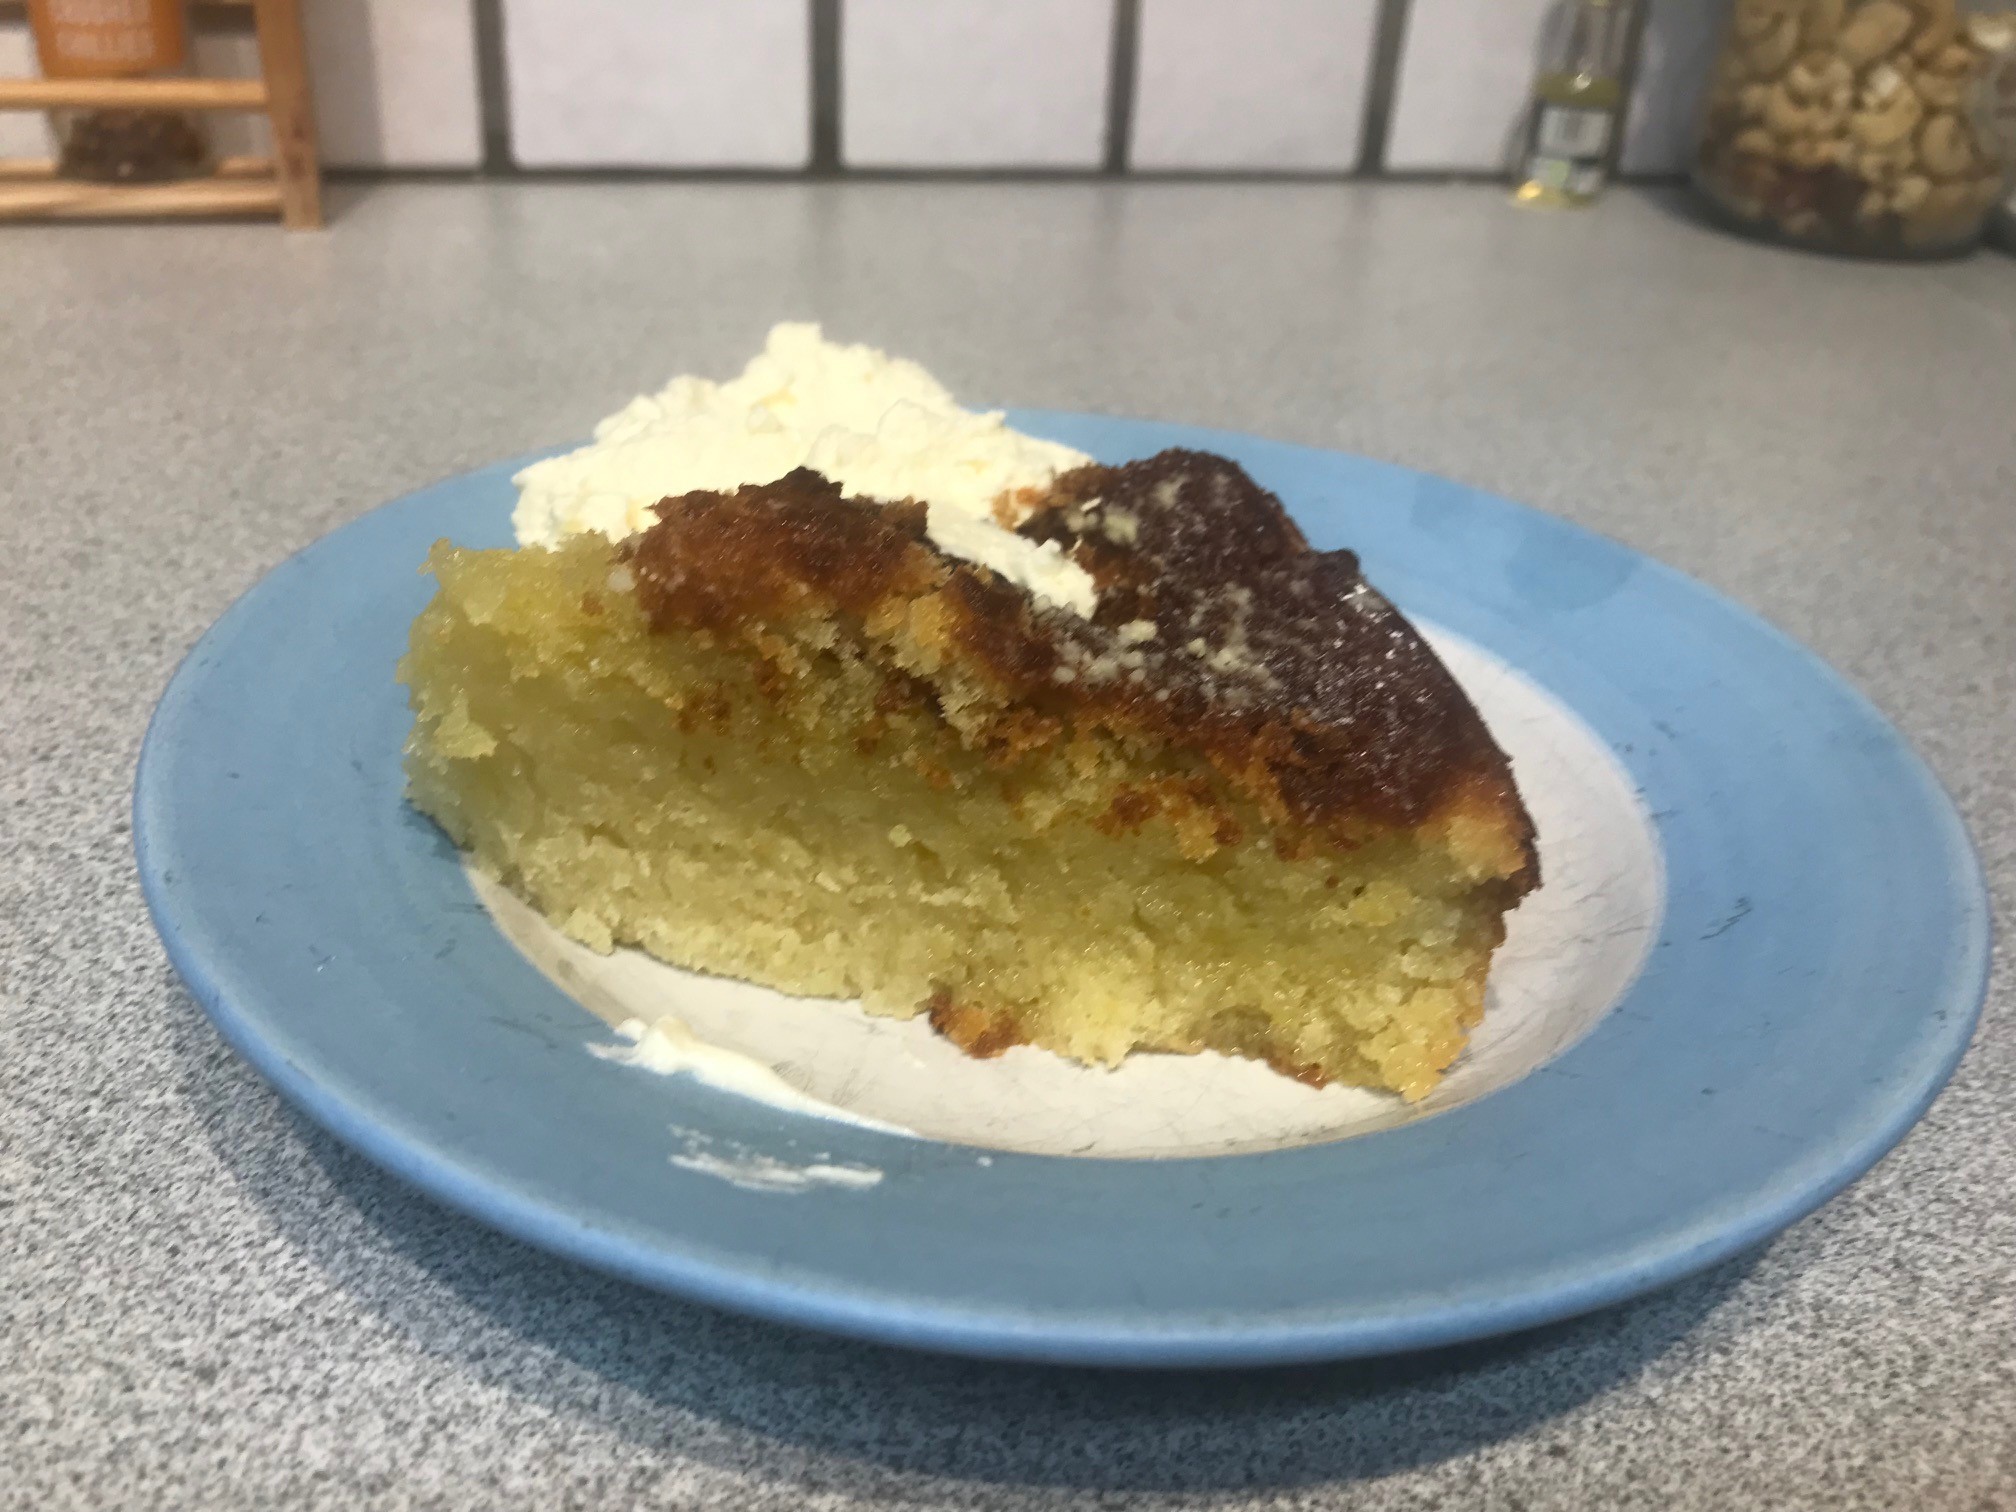 Lisa Salmon's version of the lemon and olive oil cake